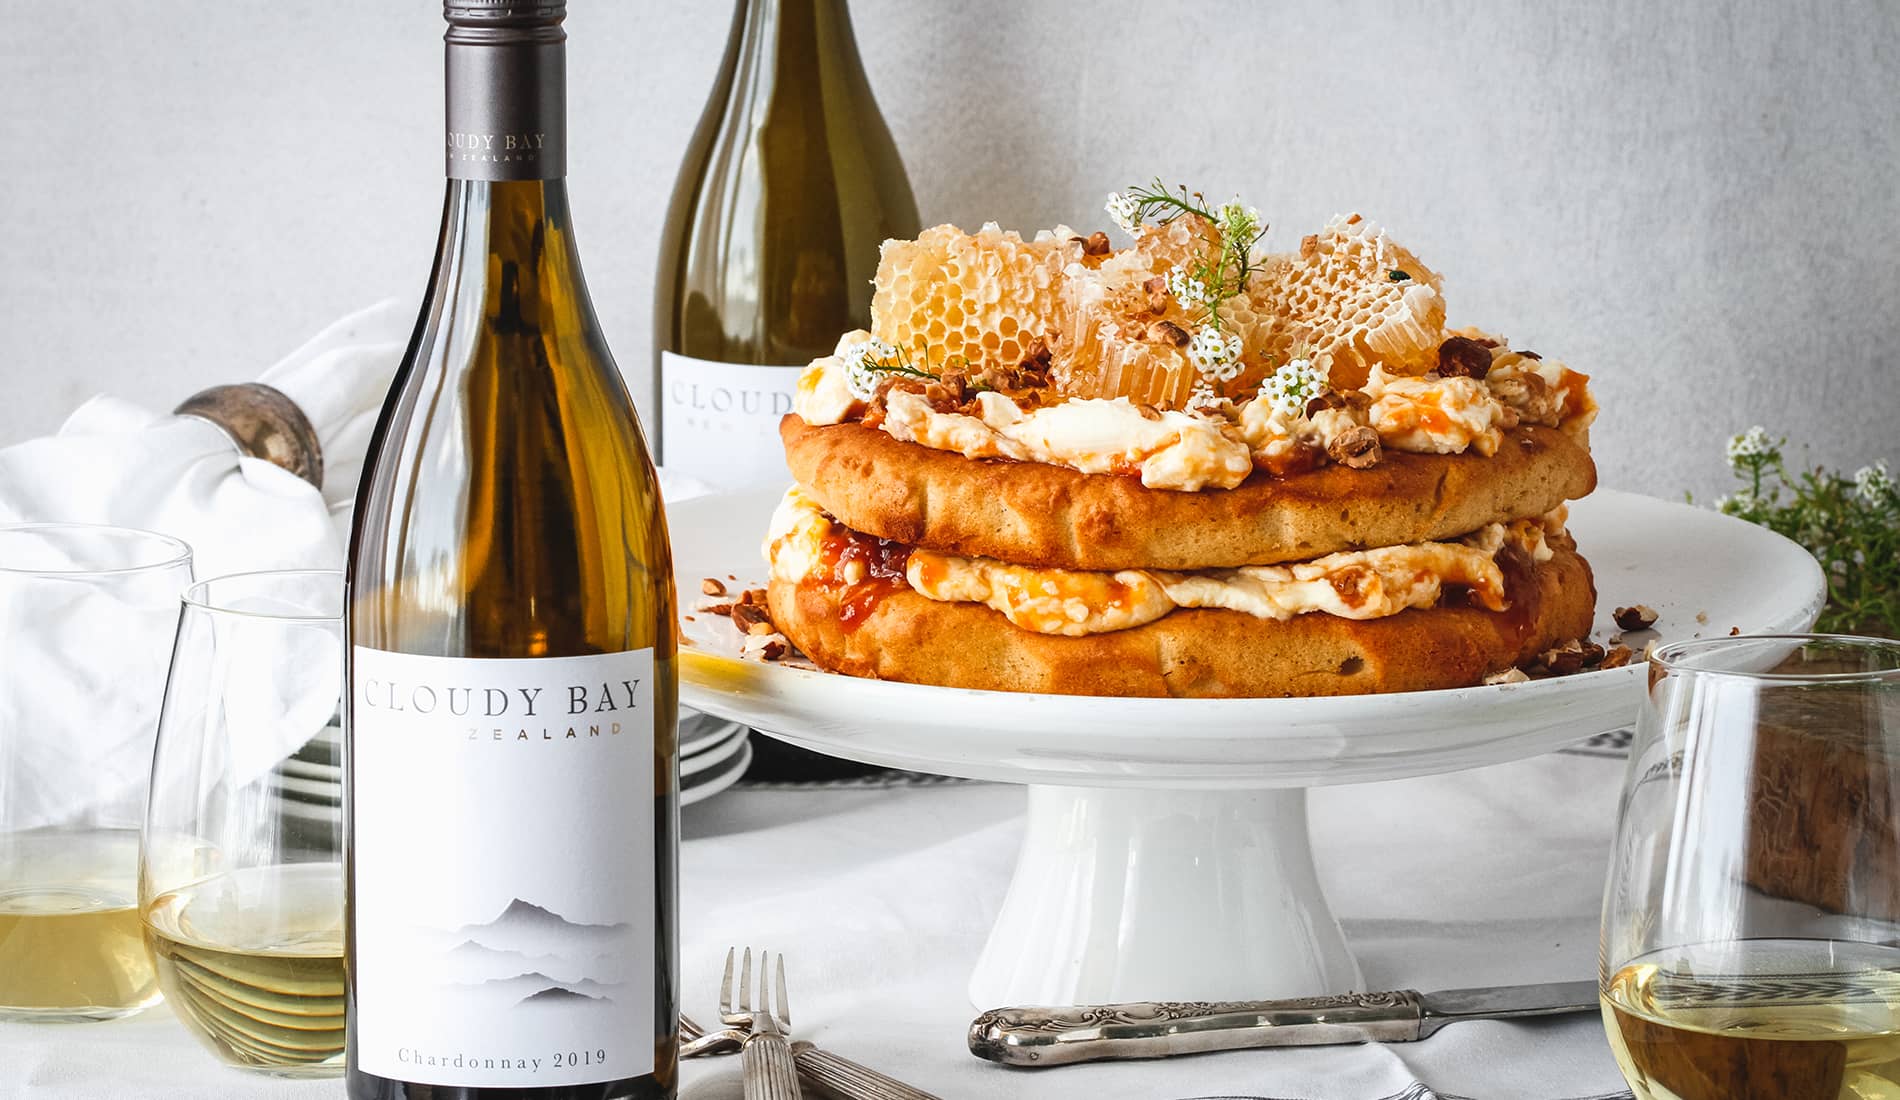 Layered ckae beside bottle and glass of Cloudy Bay Chardonnay